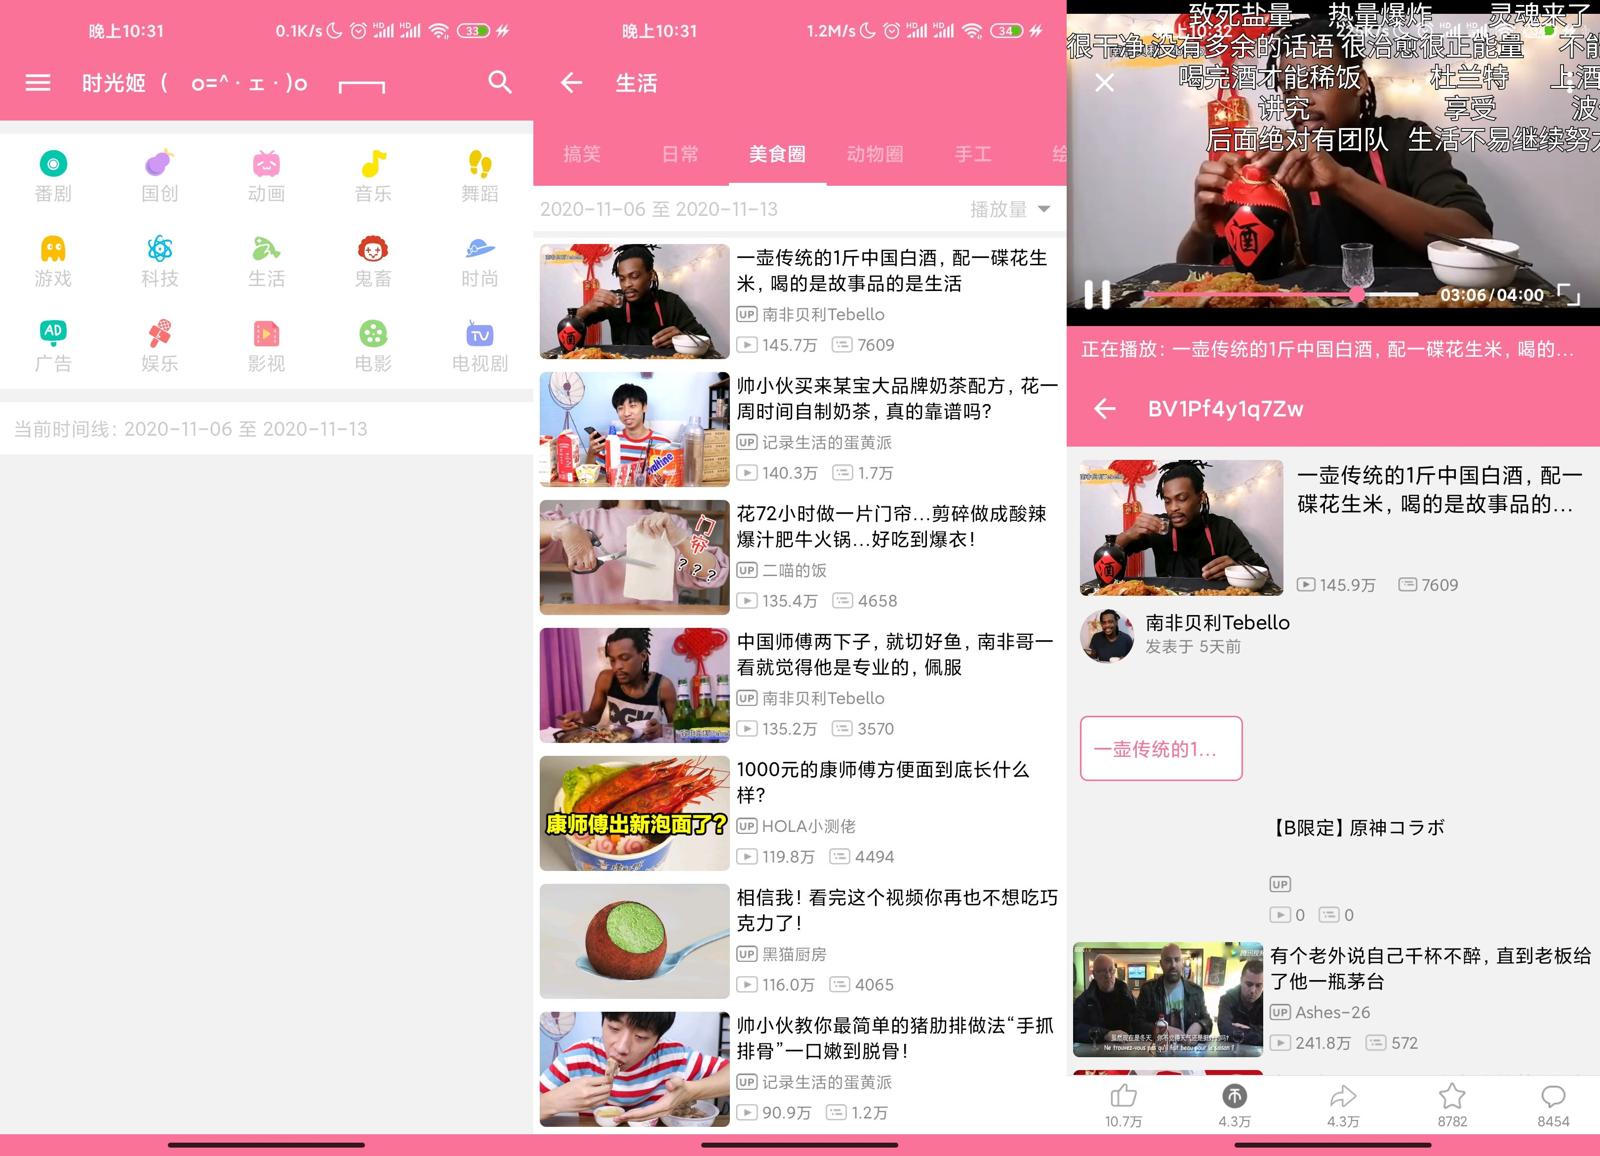 bilimiao v2.0.9 for Android 第三方B站客户端-乐宝库